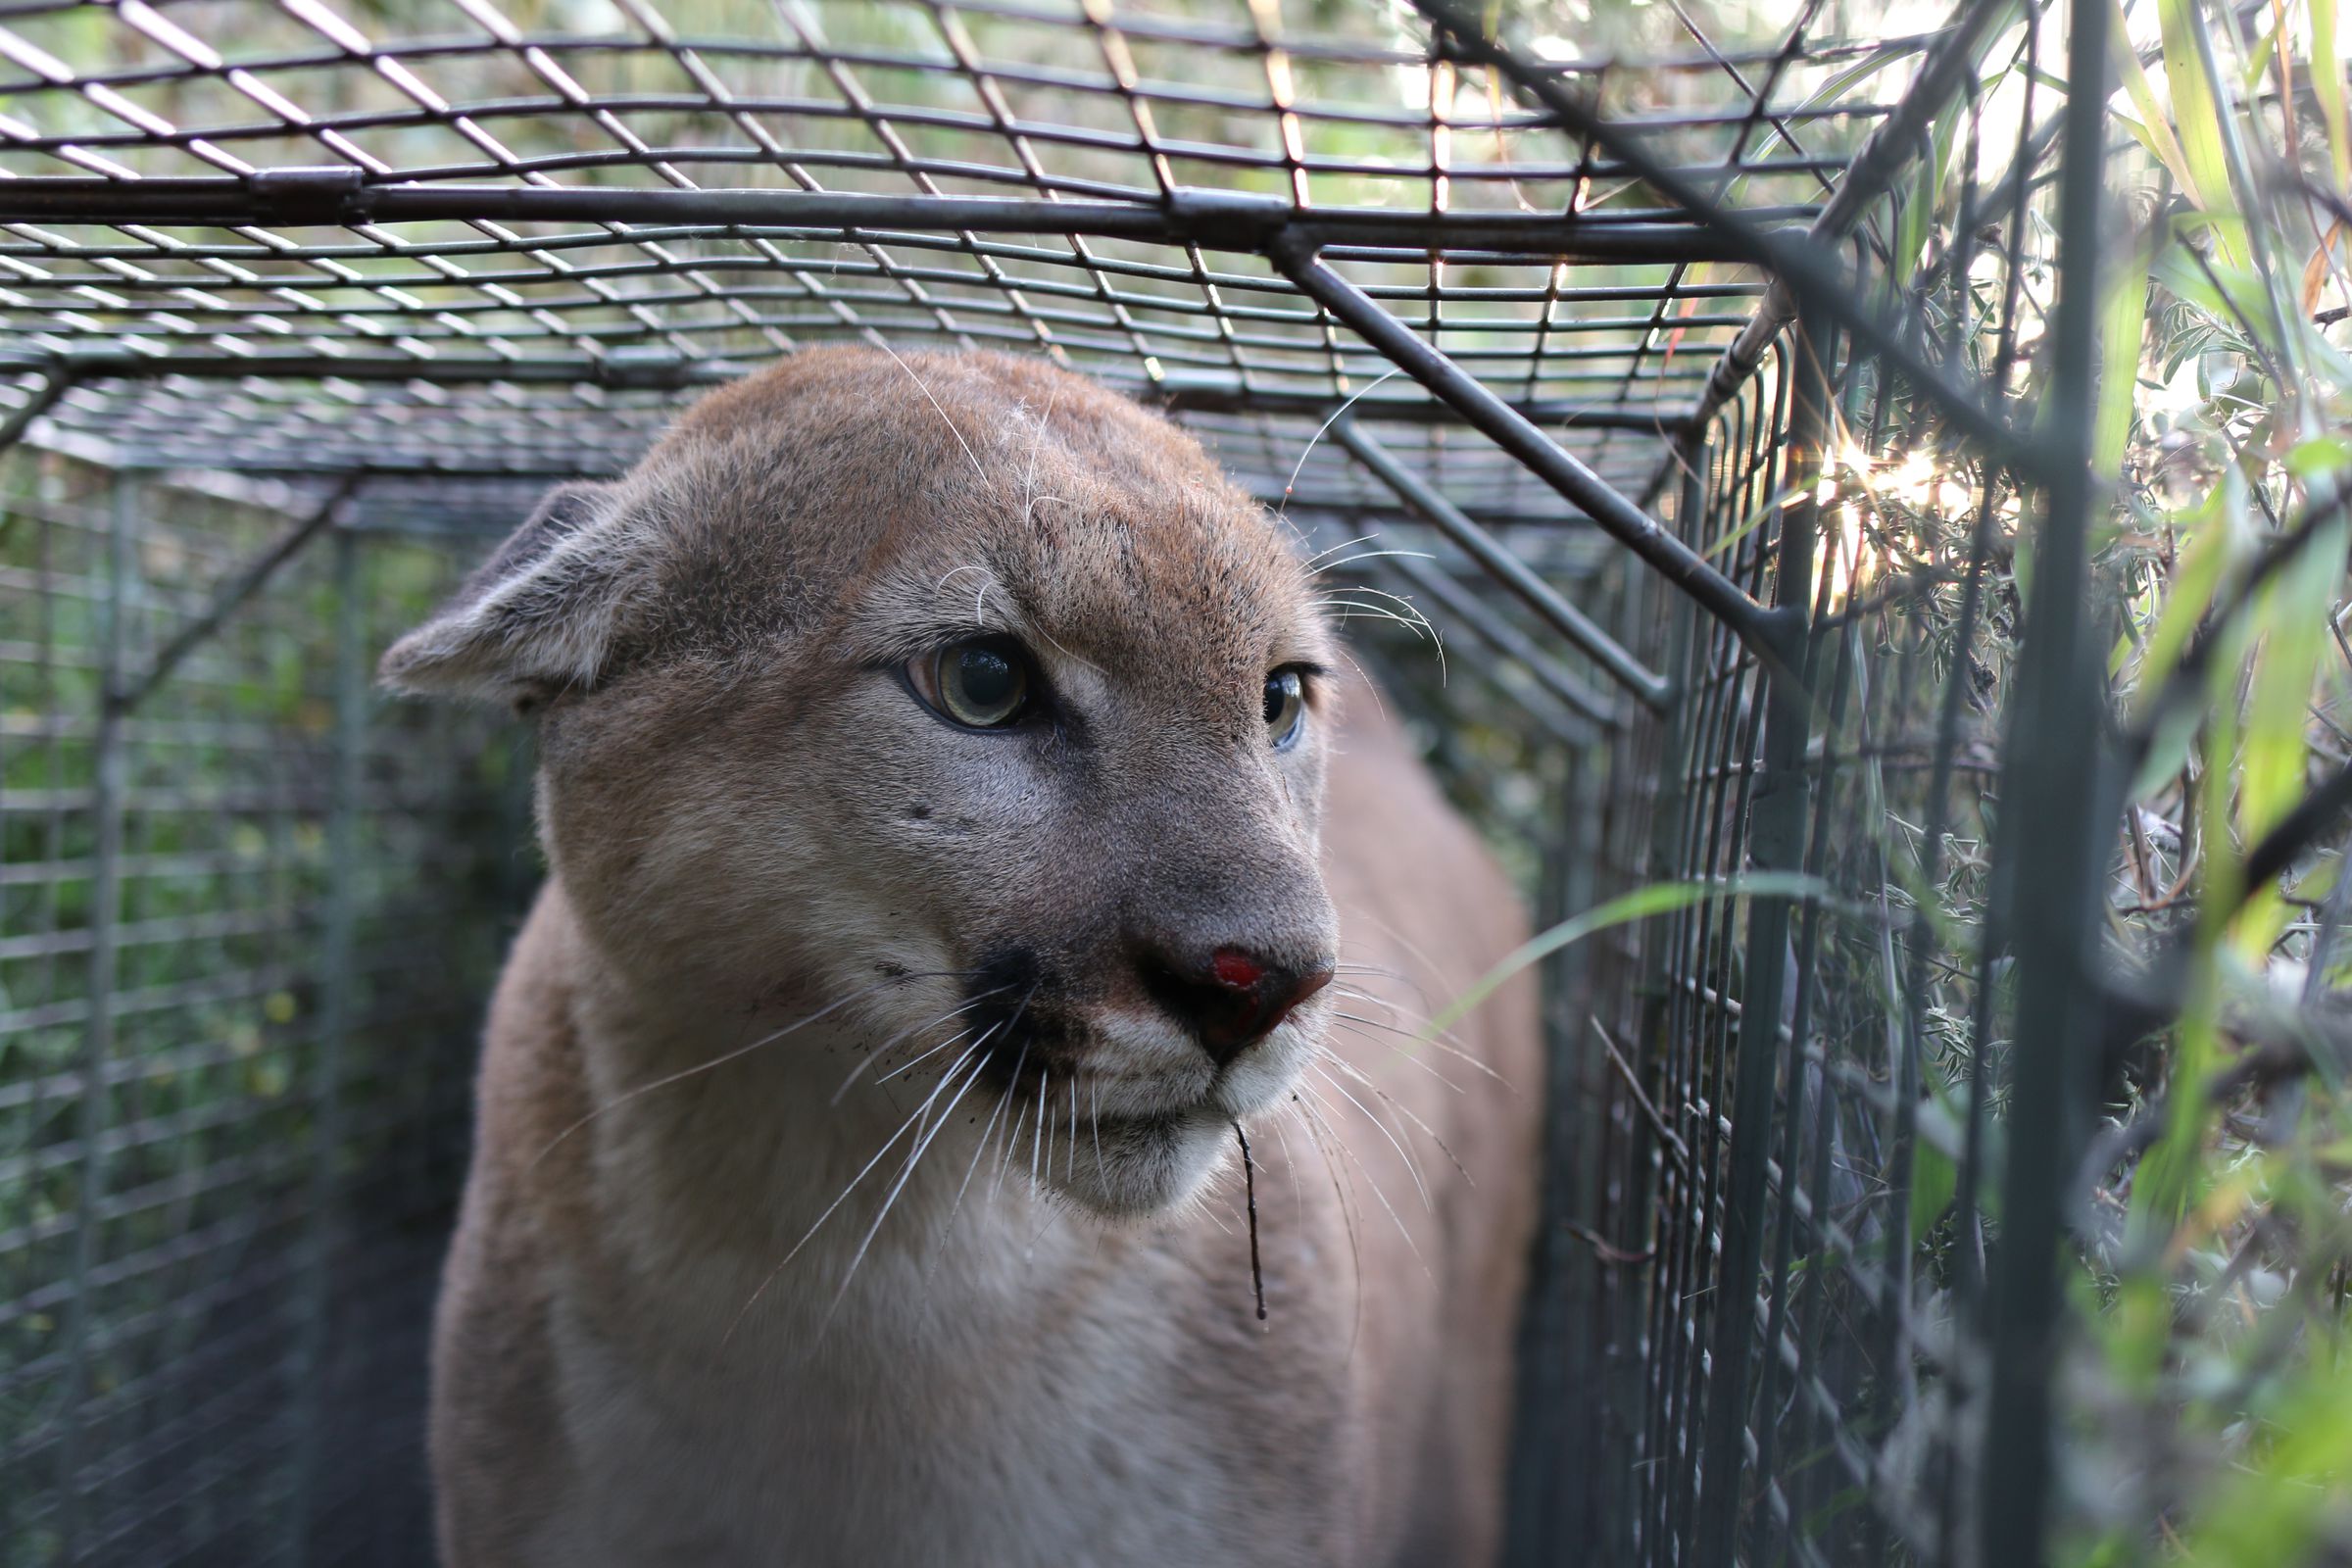 The mountain lion P-55 was tagged in April by the National Park Service.